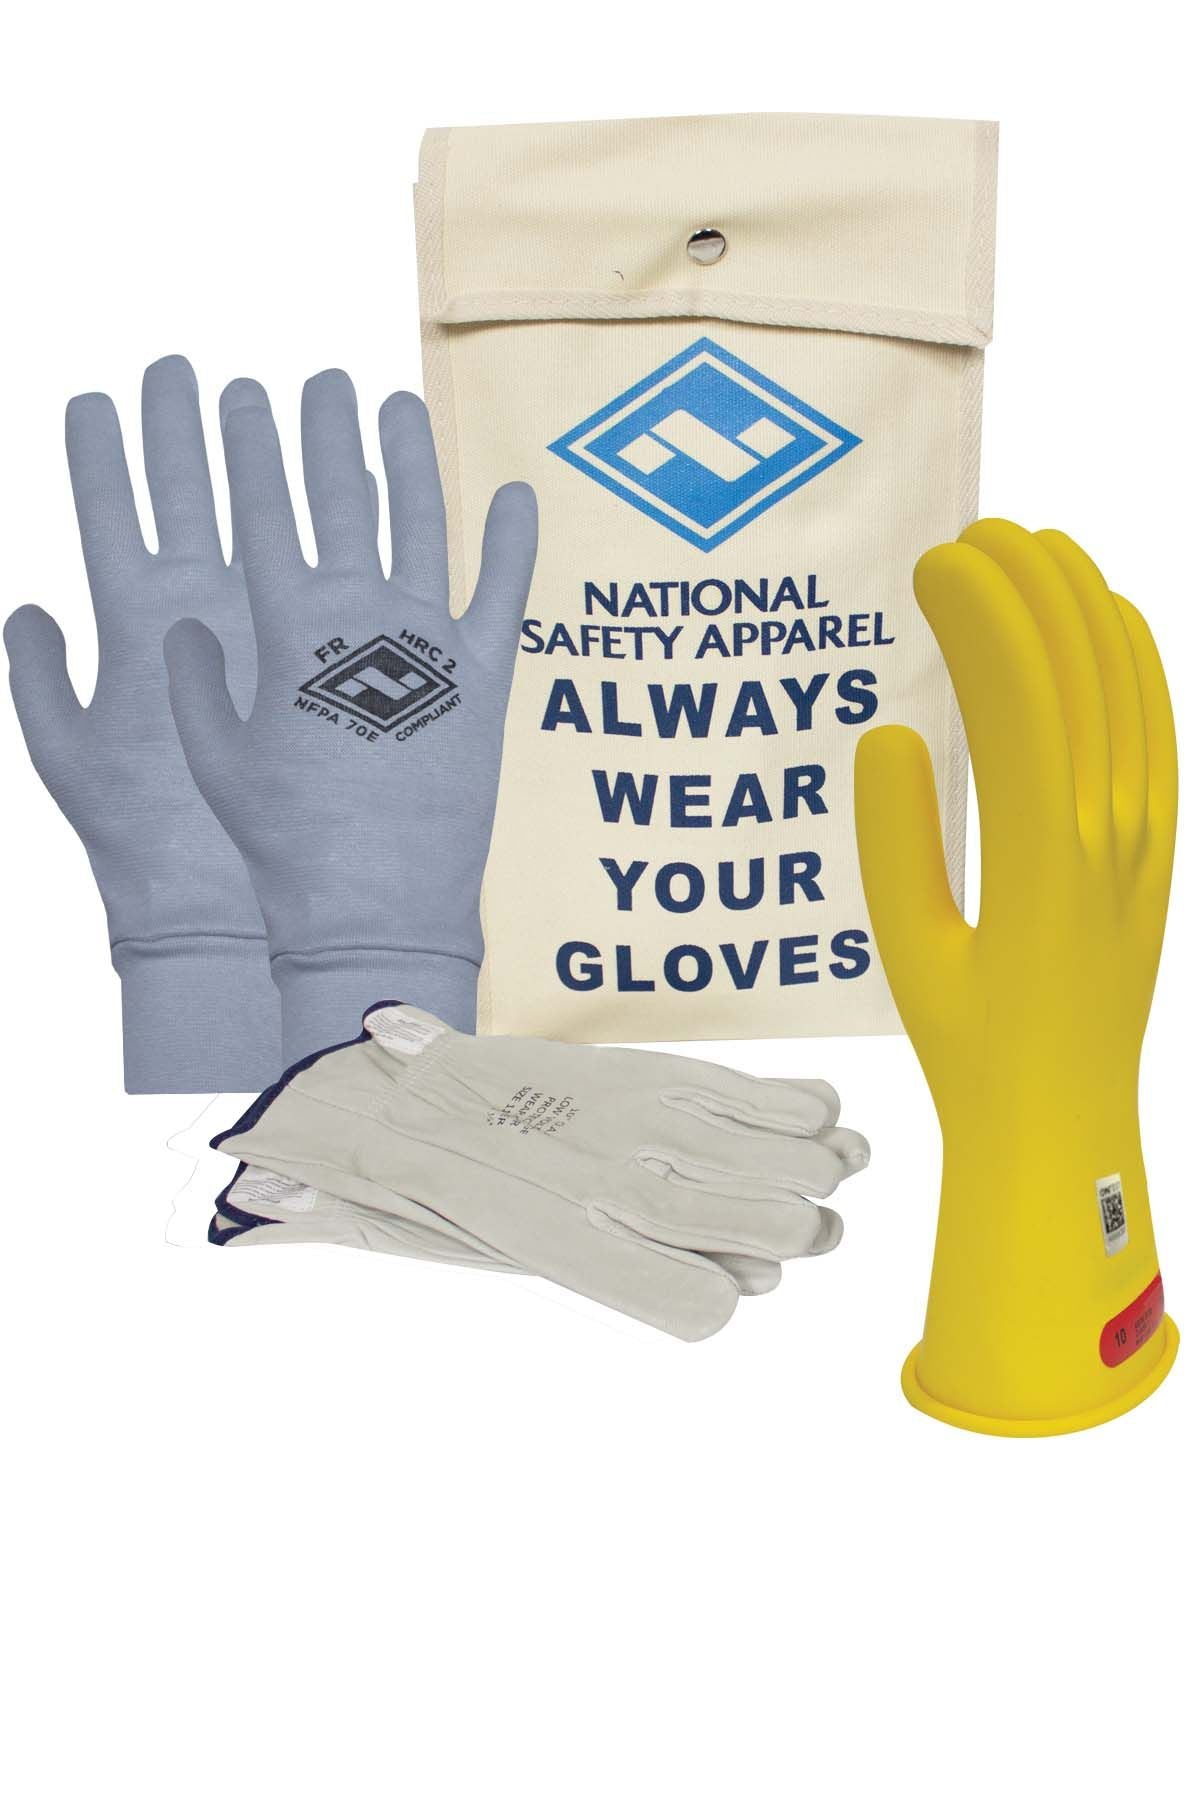 How to Determine Which Cut-resistant Glove Rating is OSHA Compliant for  Your Job Site